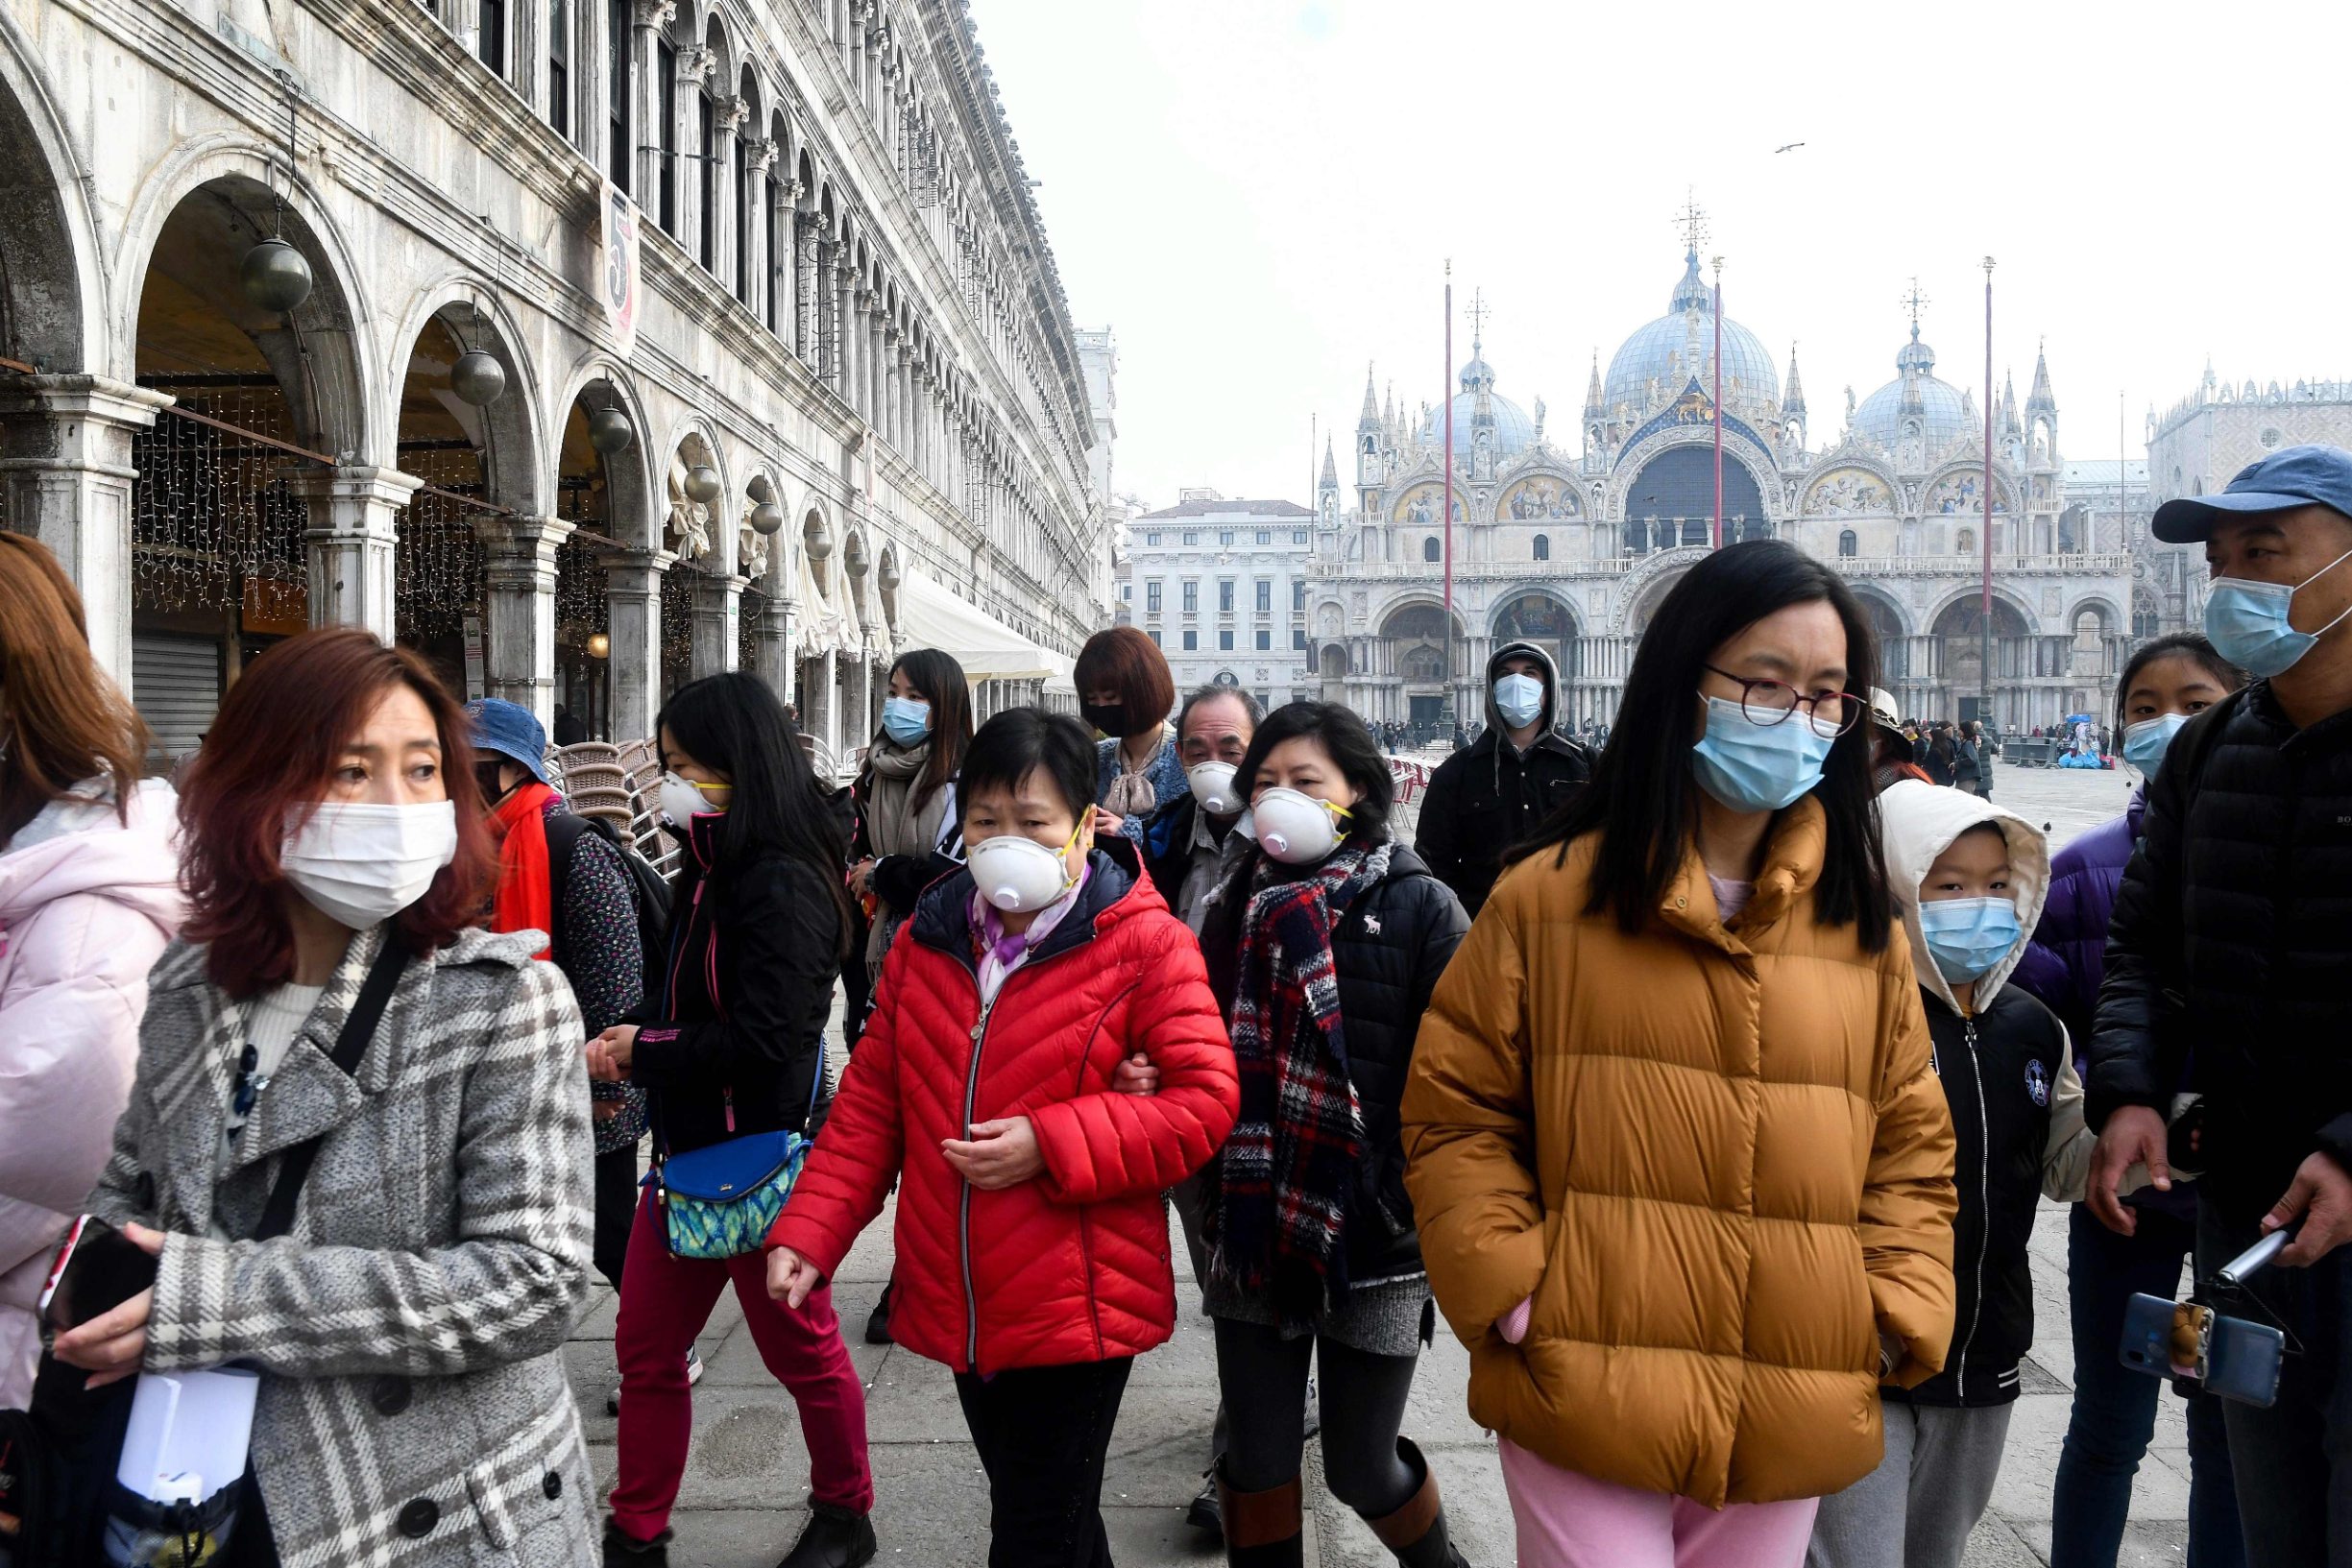 Tourists wearing protective facemasks visit the Piazza San Marco, in Venice, on February 24, 2020 during the usual period of the Carnival festivities which the last two days have been cancelled due to an outbreak of the COVID-19 the novel coronavirus, in northern Italy. - Italy reported on February 24, 2020 its fourth death from the new coronavirus, an 84-year old man in the northern Lombardy region, as the number of people contracting the virus continued to mount. (Photo by ANDREA PATTARO / AFP)